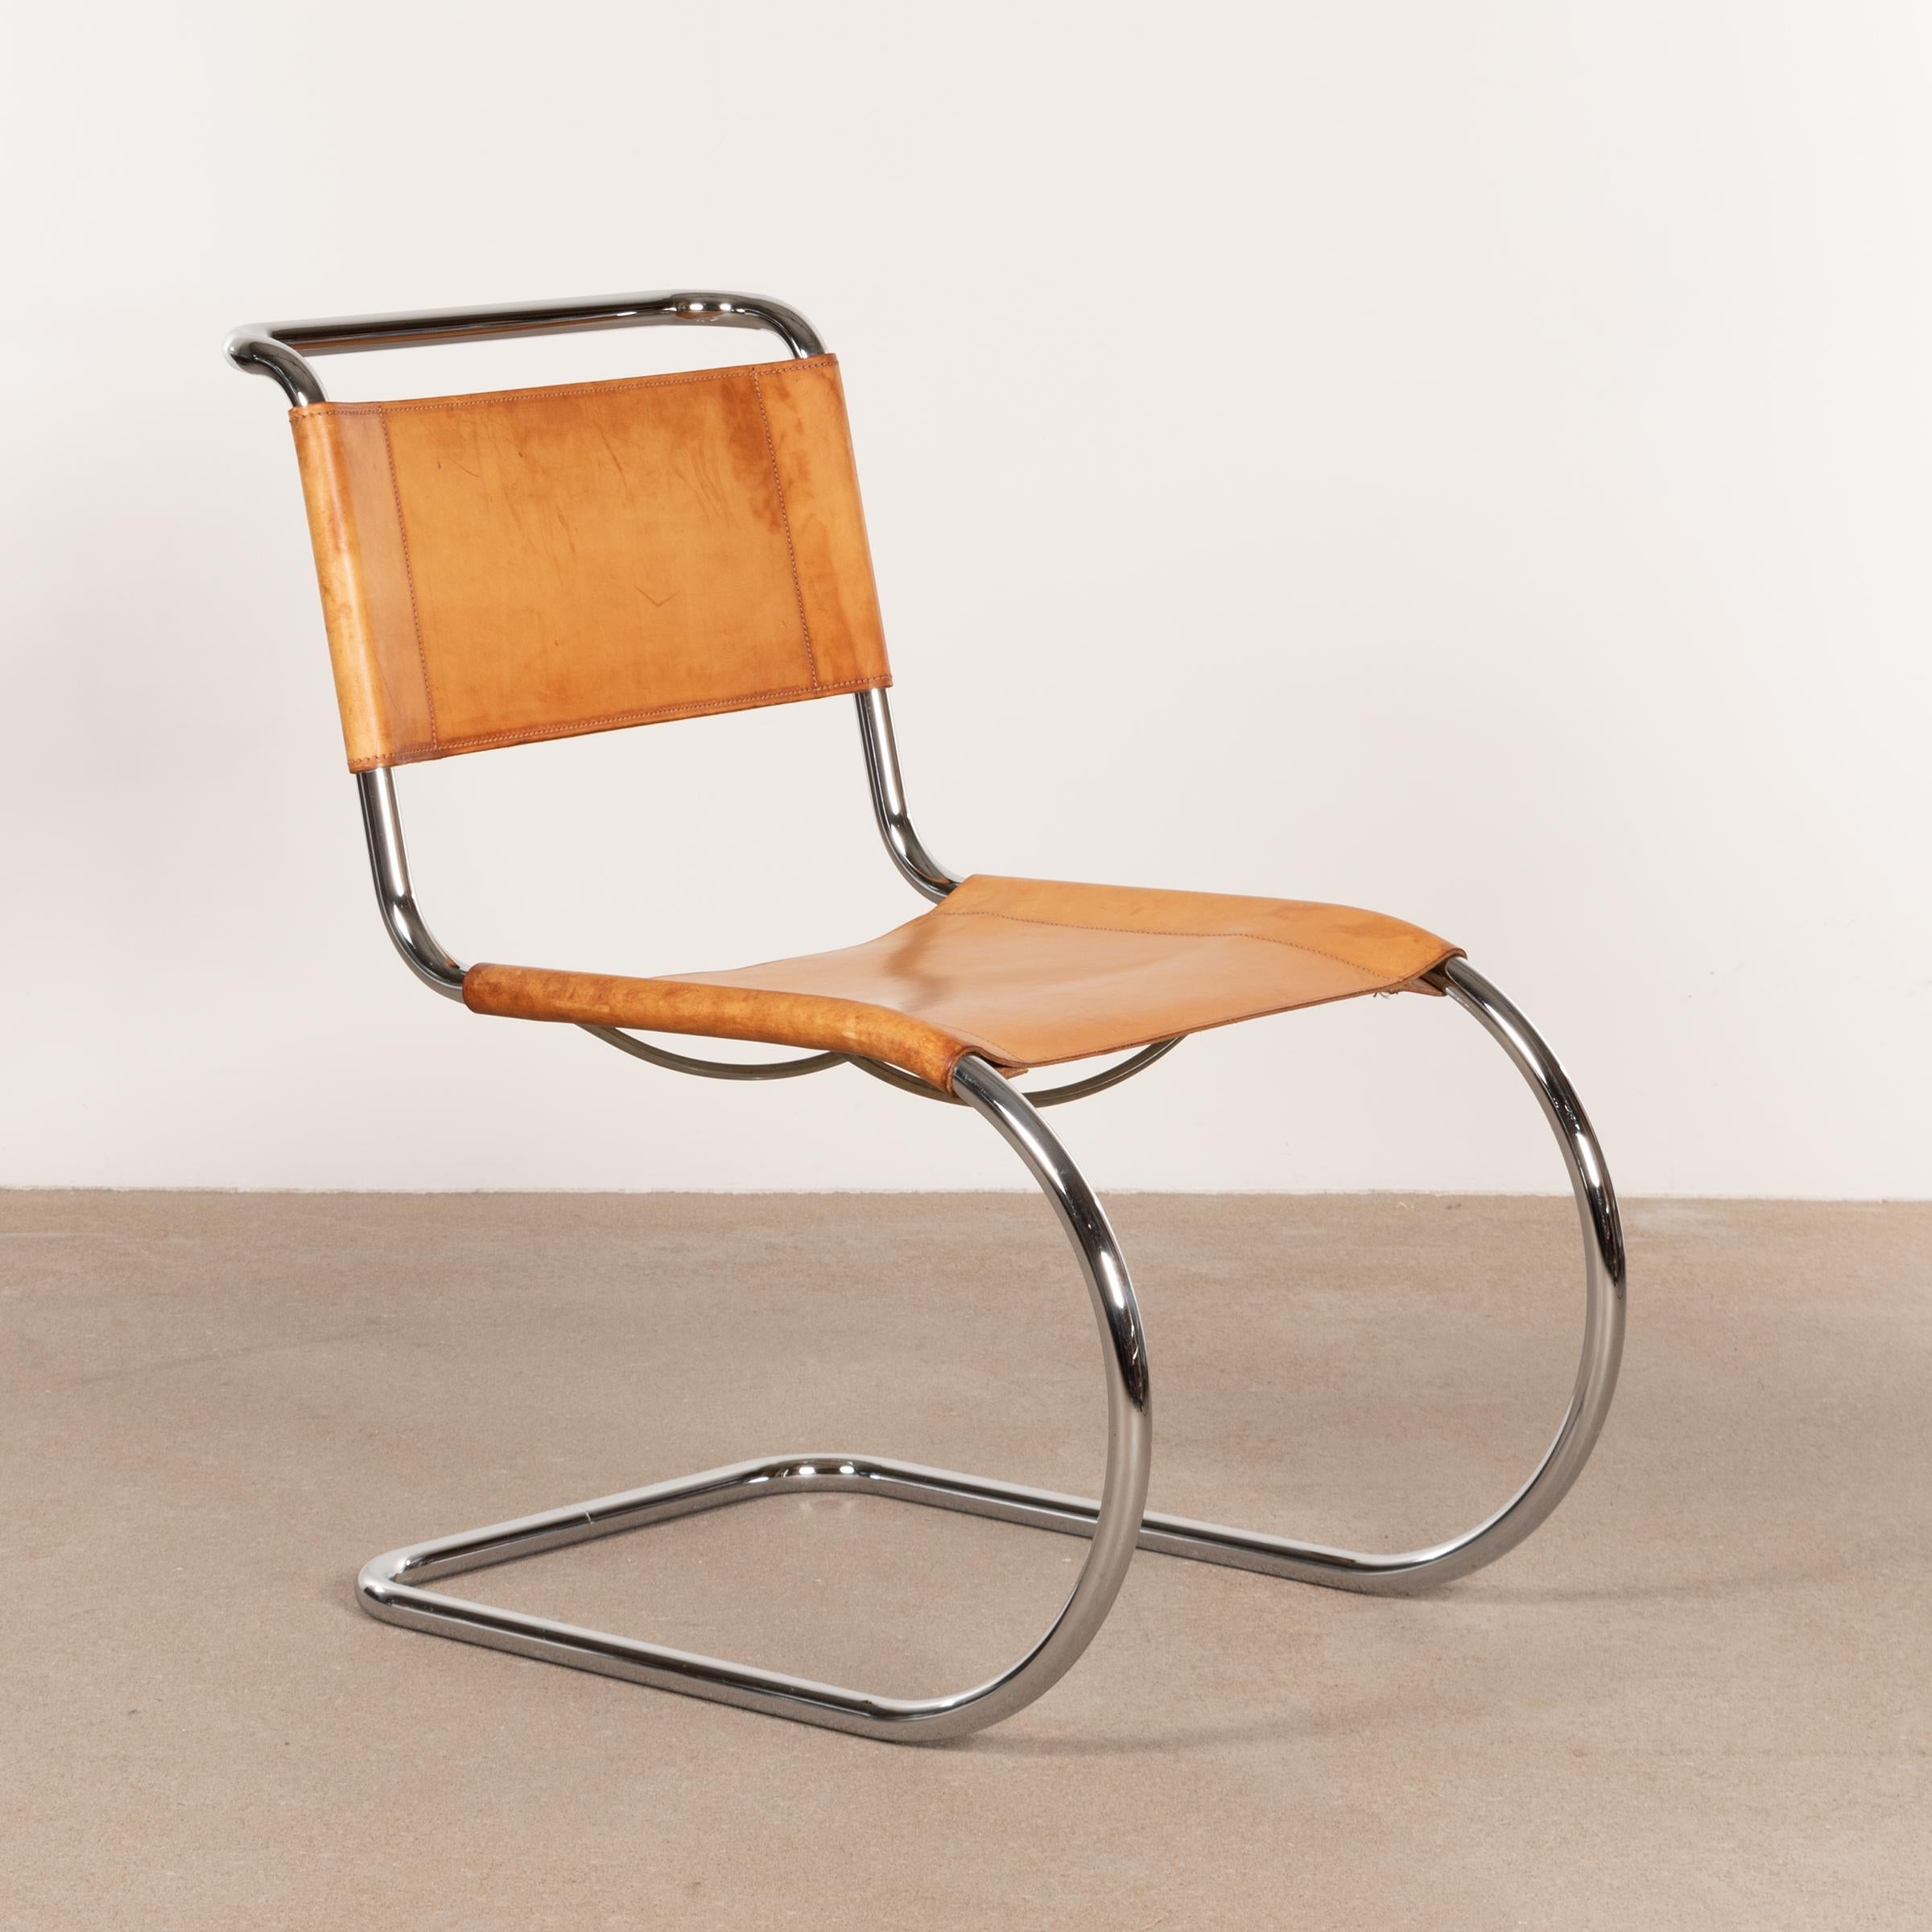 German Mies van der Rohe MR10 Cantilever Chairs in Cognac Leather for Thonet